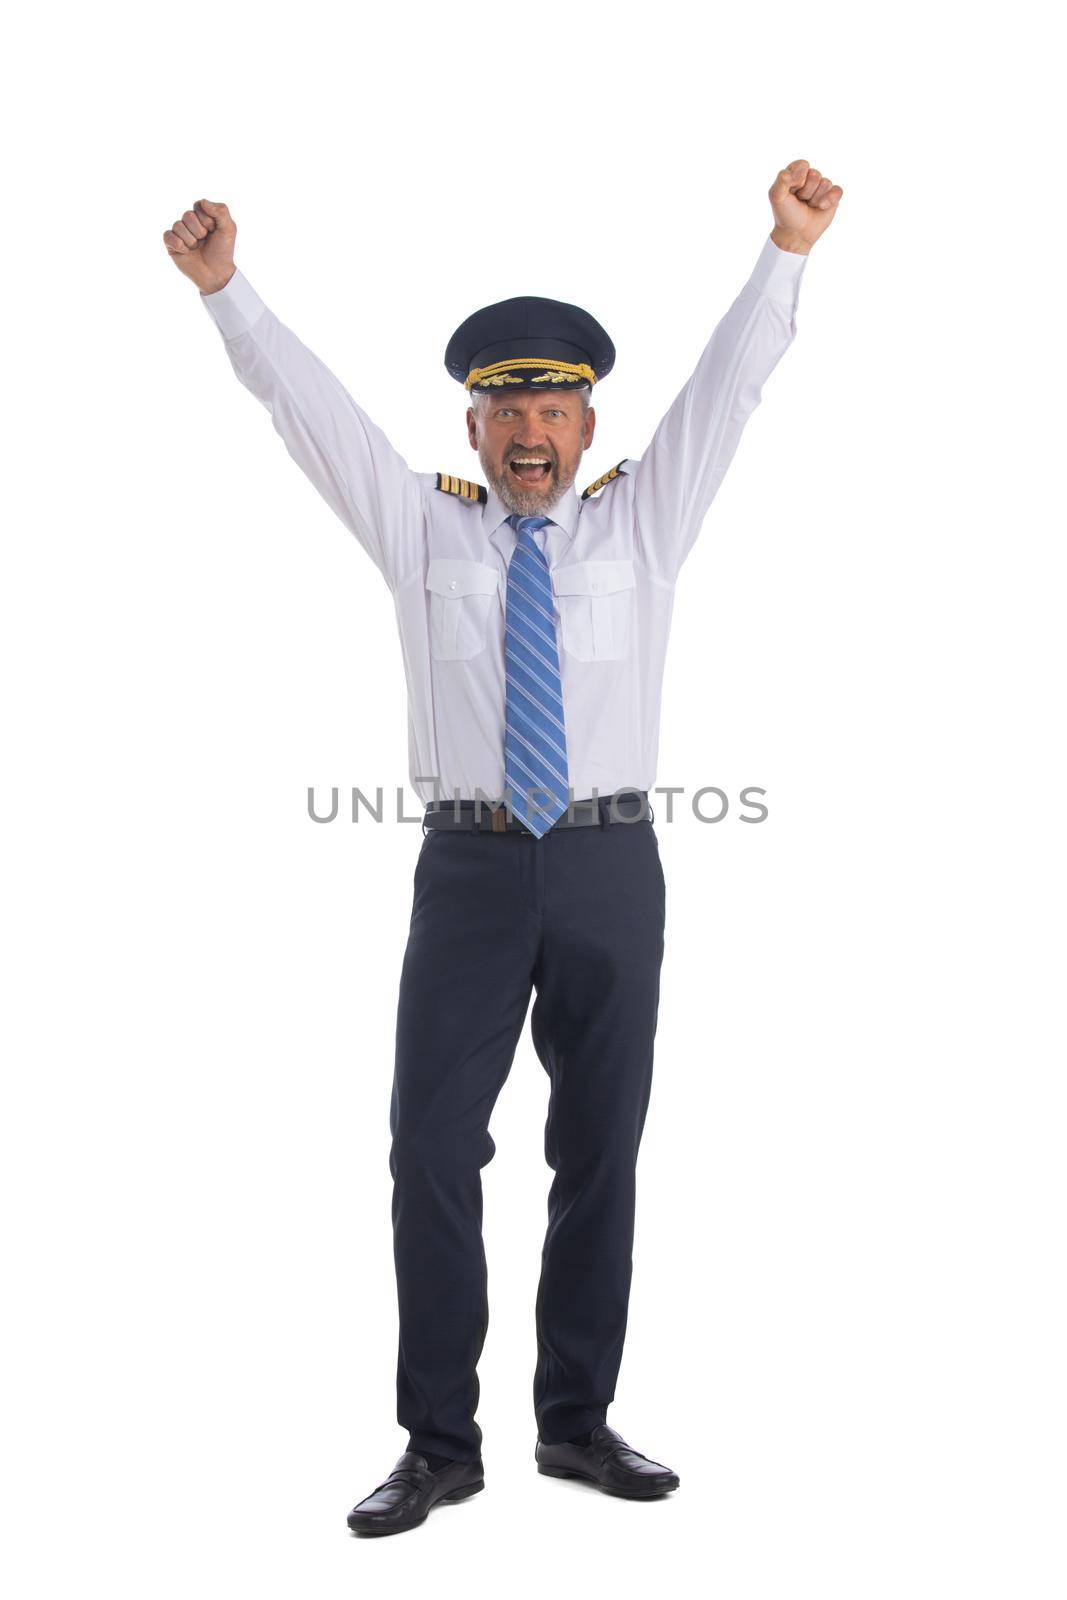 Airline pilot holds up his arms isolated on white background full length studio portrait